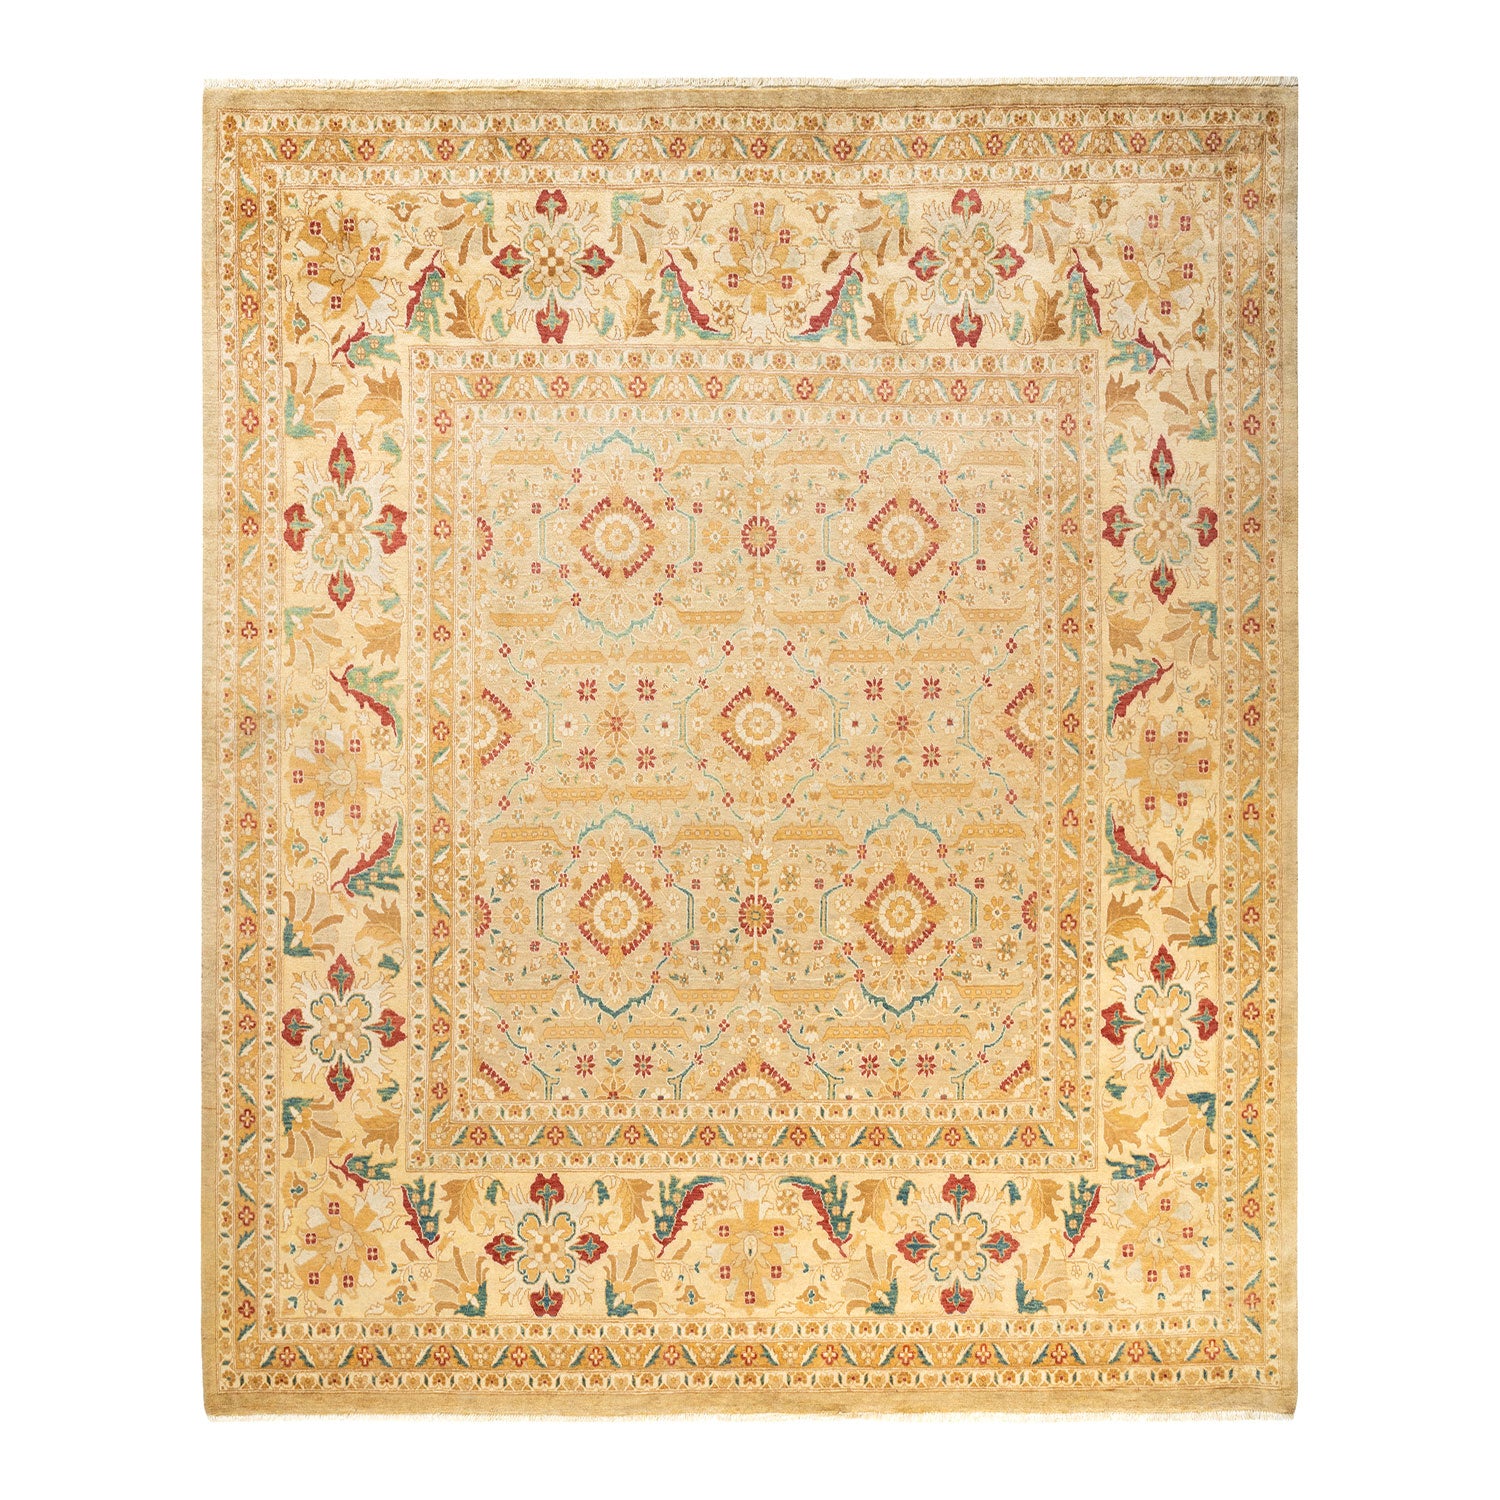 An intricate, hand-woven rectangular rug with vibrant geometric patterns